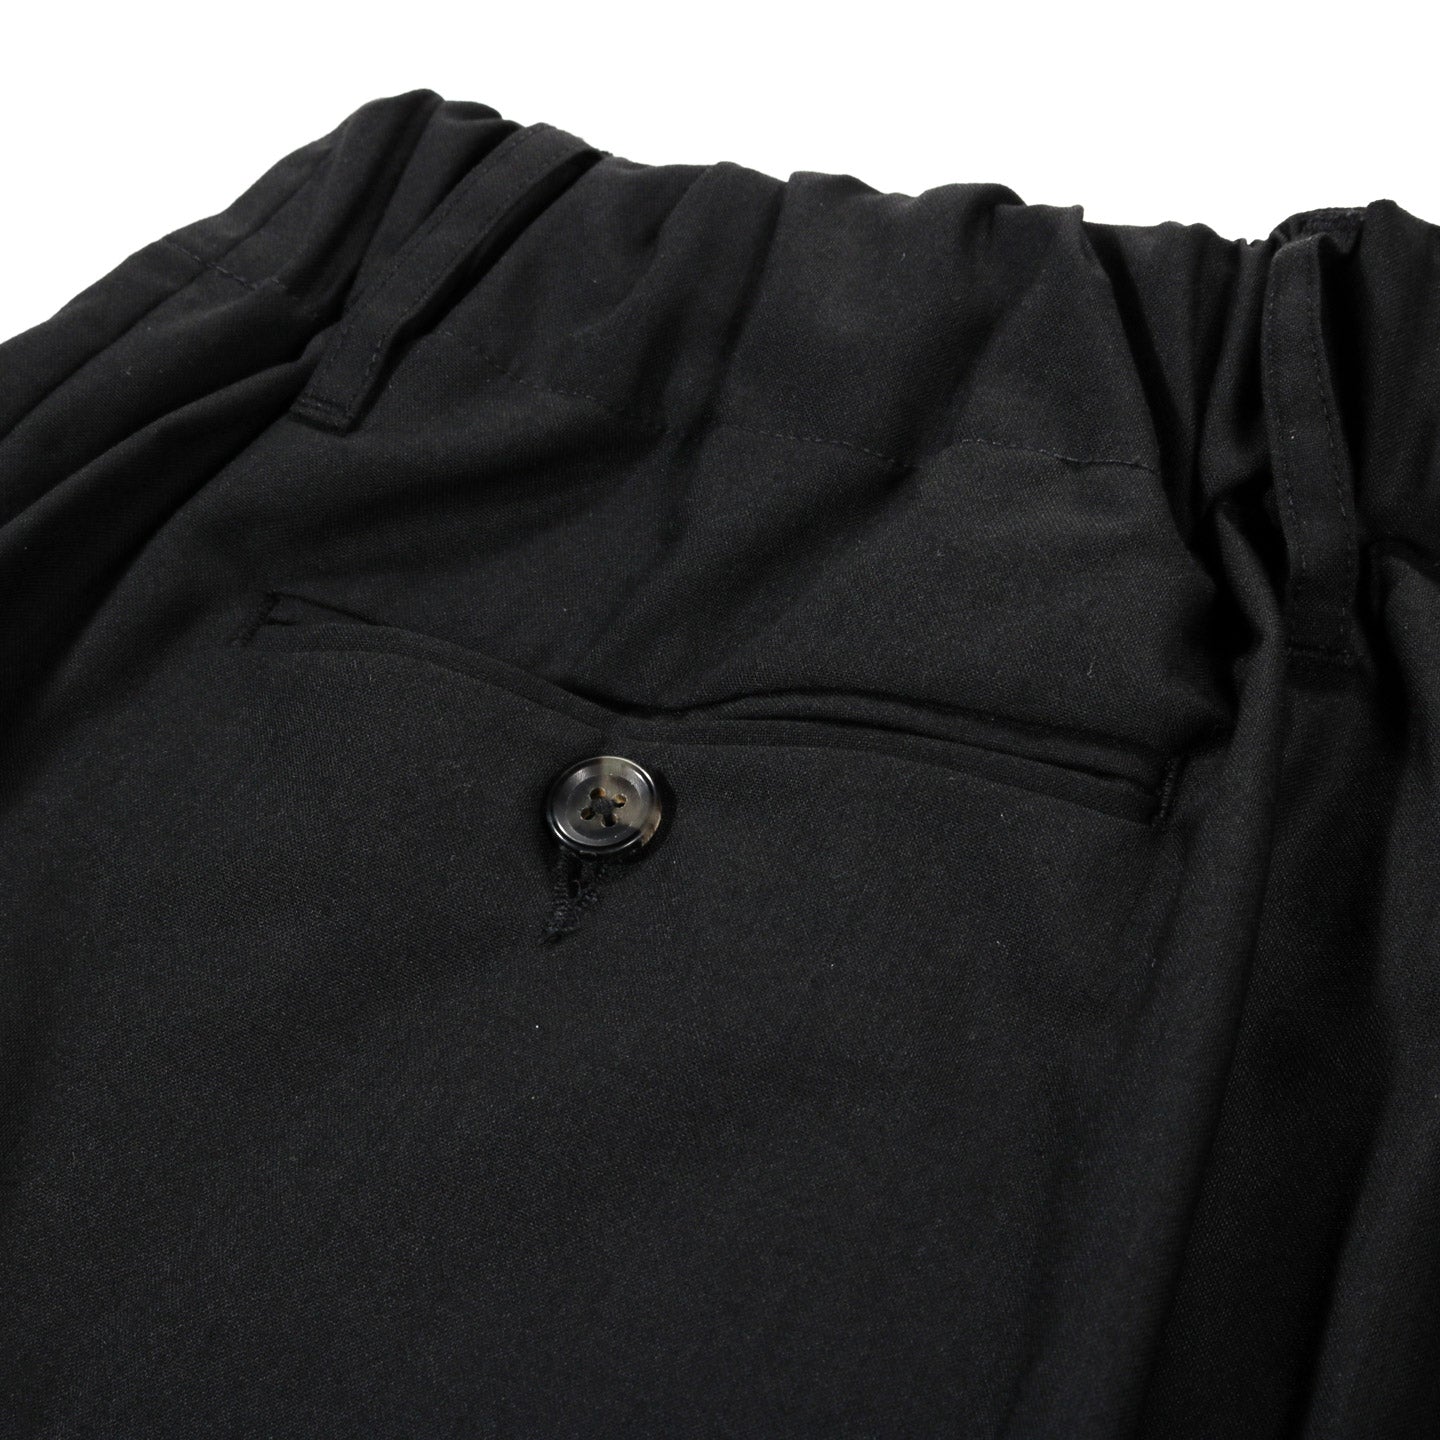 SILLAGE BAGGY TROUSERS BLACK